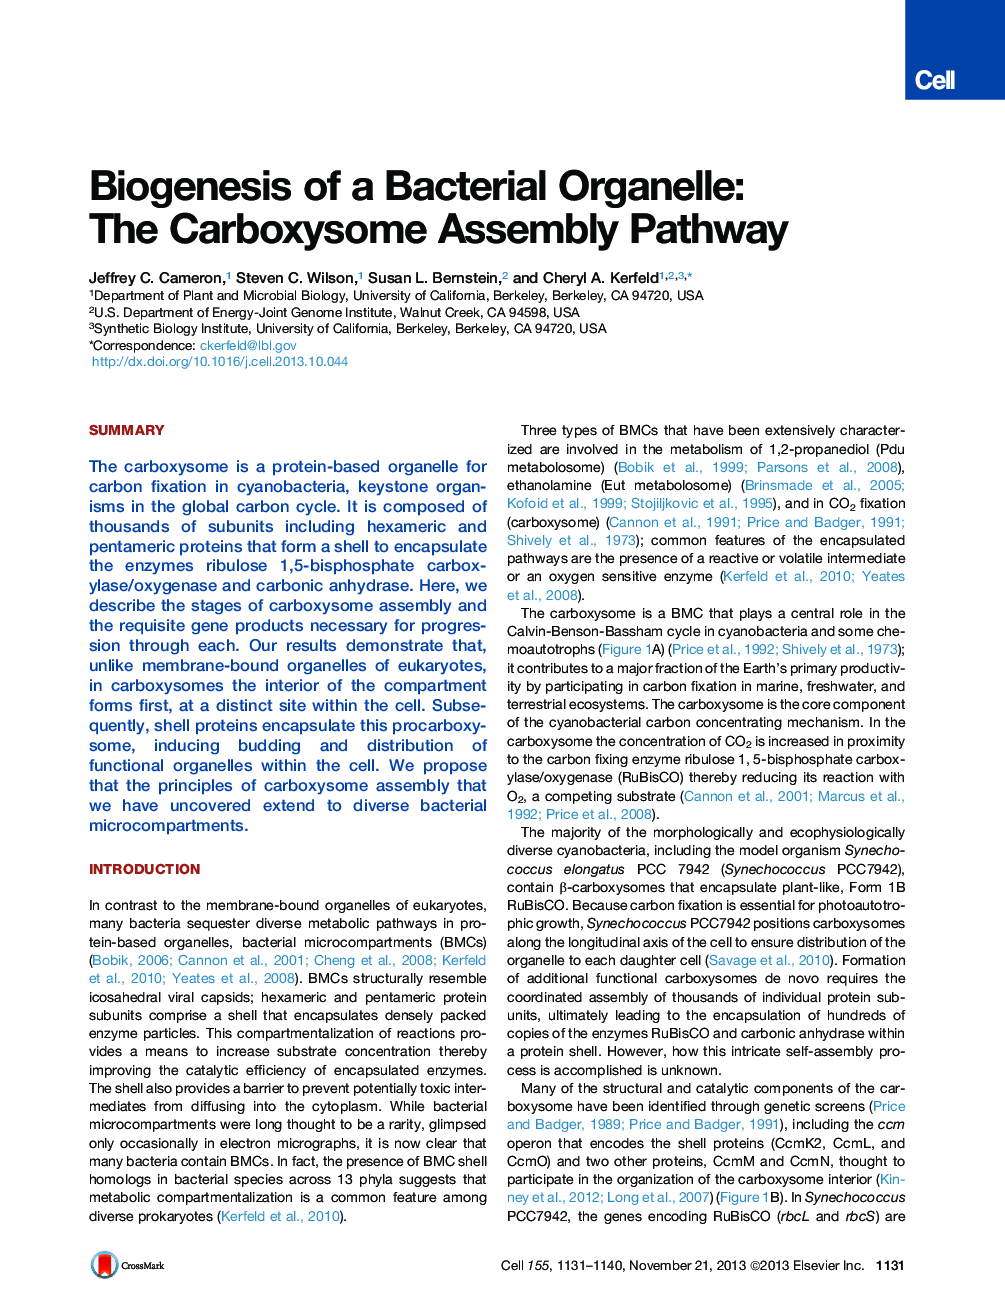 Biogenesis of a Bacterial Organelle: The Carboxysome Assembly Pathway